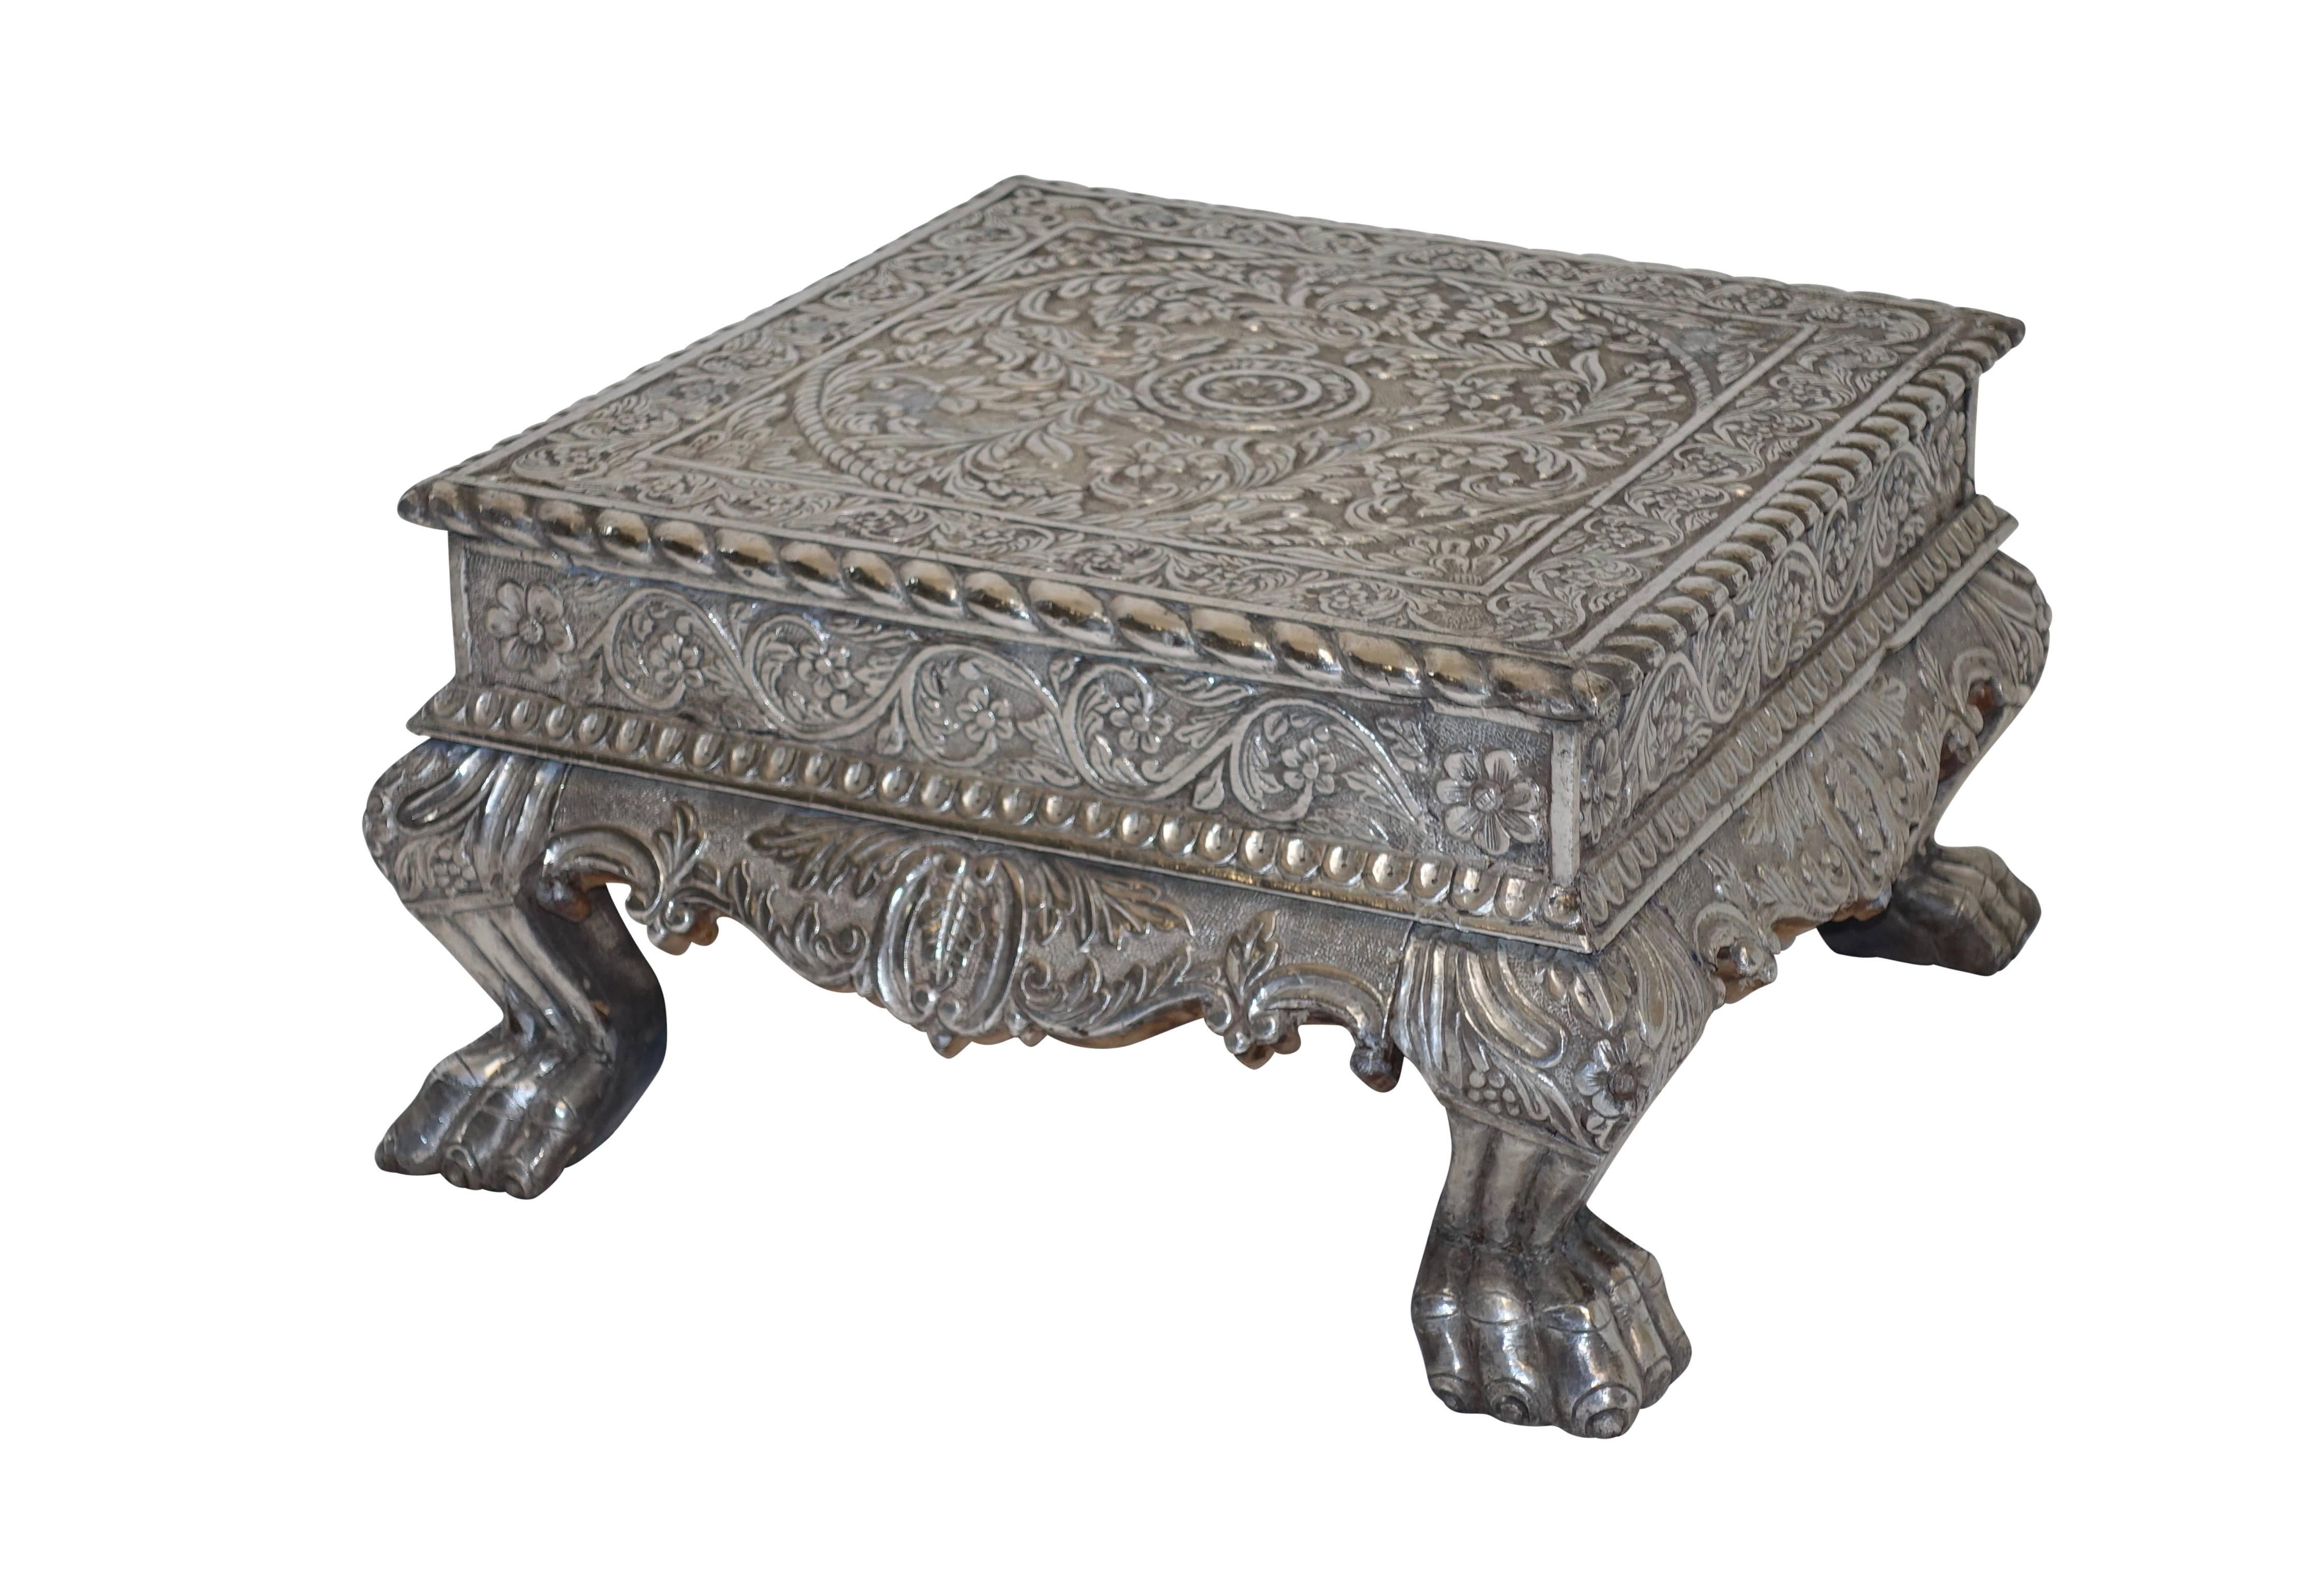 Silver clad and intricately carved teak wood Bajot or low table. These tables were traditionally used for eating or ceremonial offerings,
India, circa 1925.